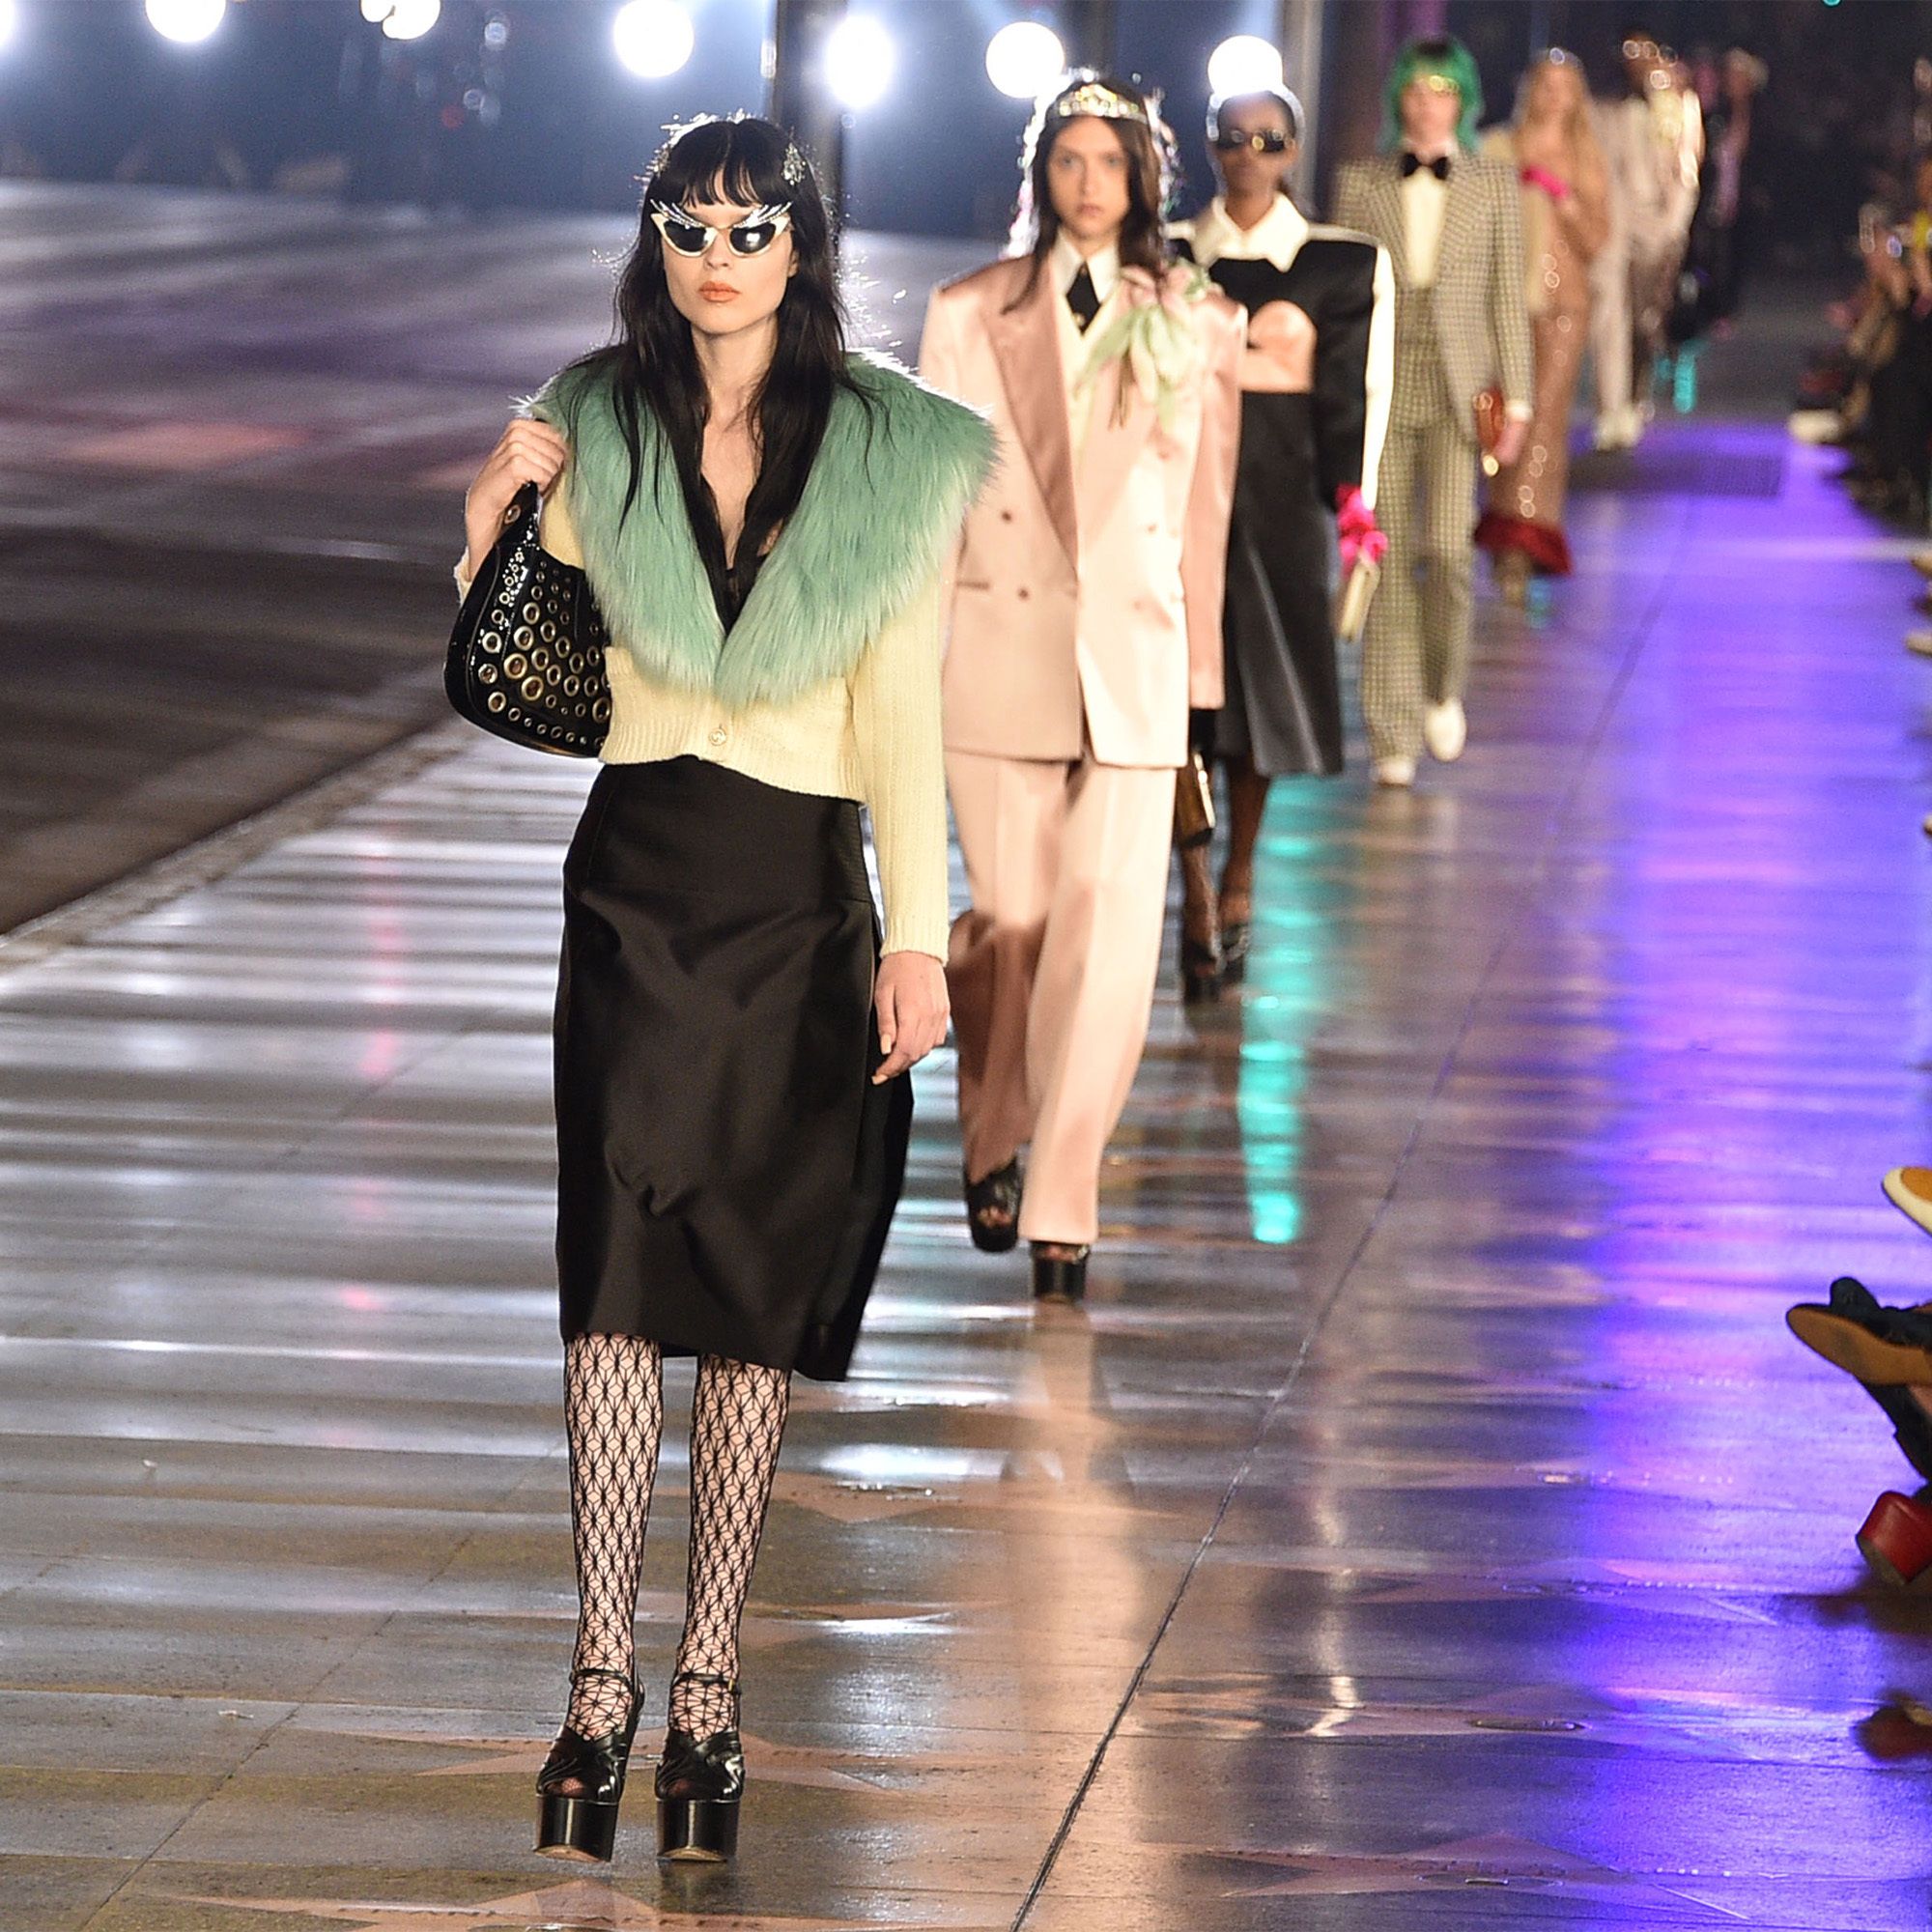 Gucci Love Parade Honors Old Hollywood Glamour